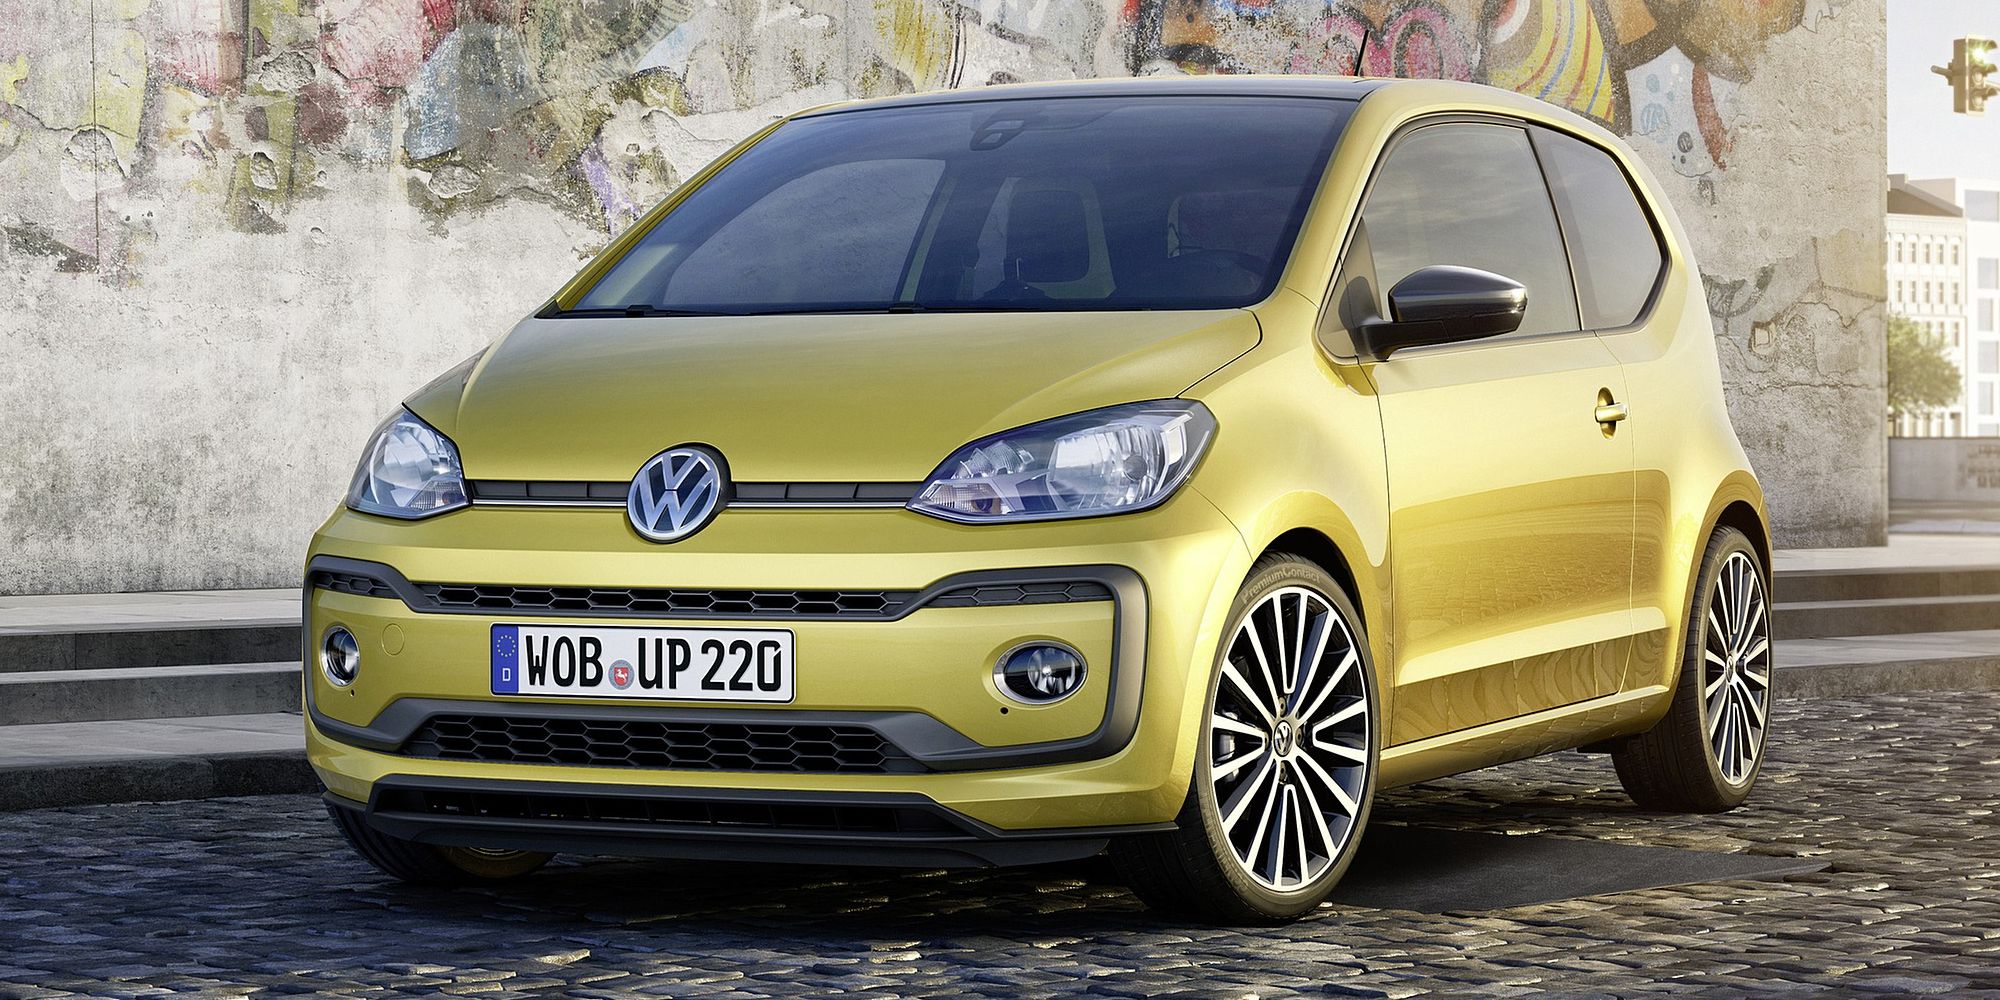 The front of the VW Up